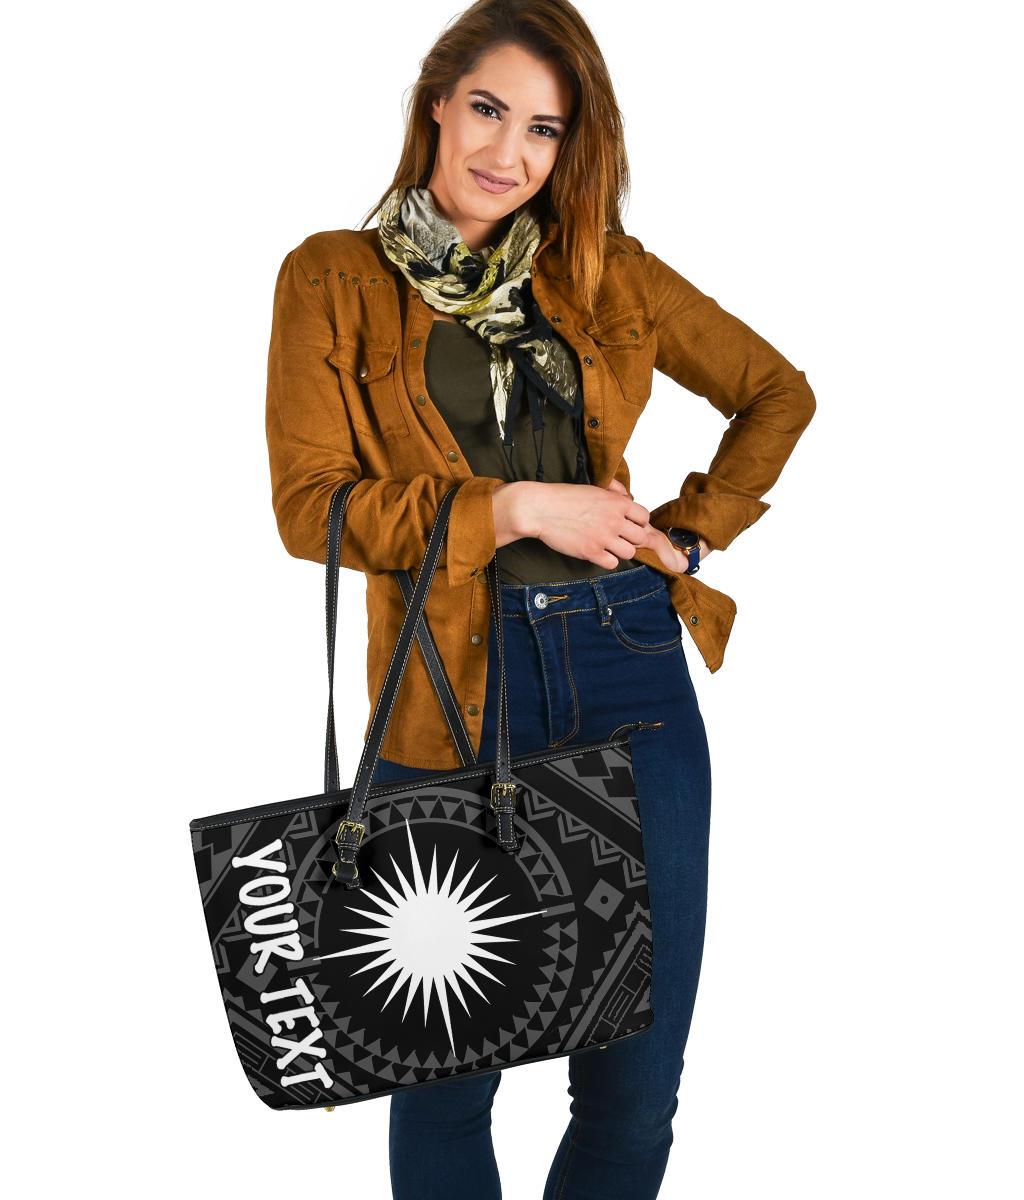 marshall-large-leather-tote-bag-marshall-seal-with-polynesian-tattoo-style-black